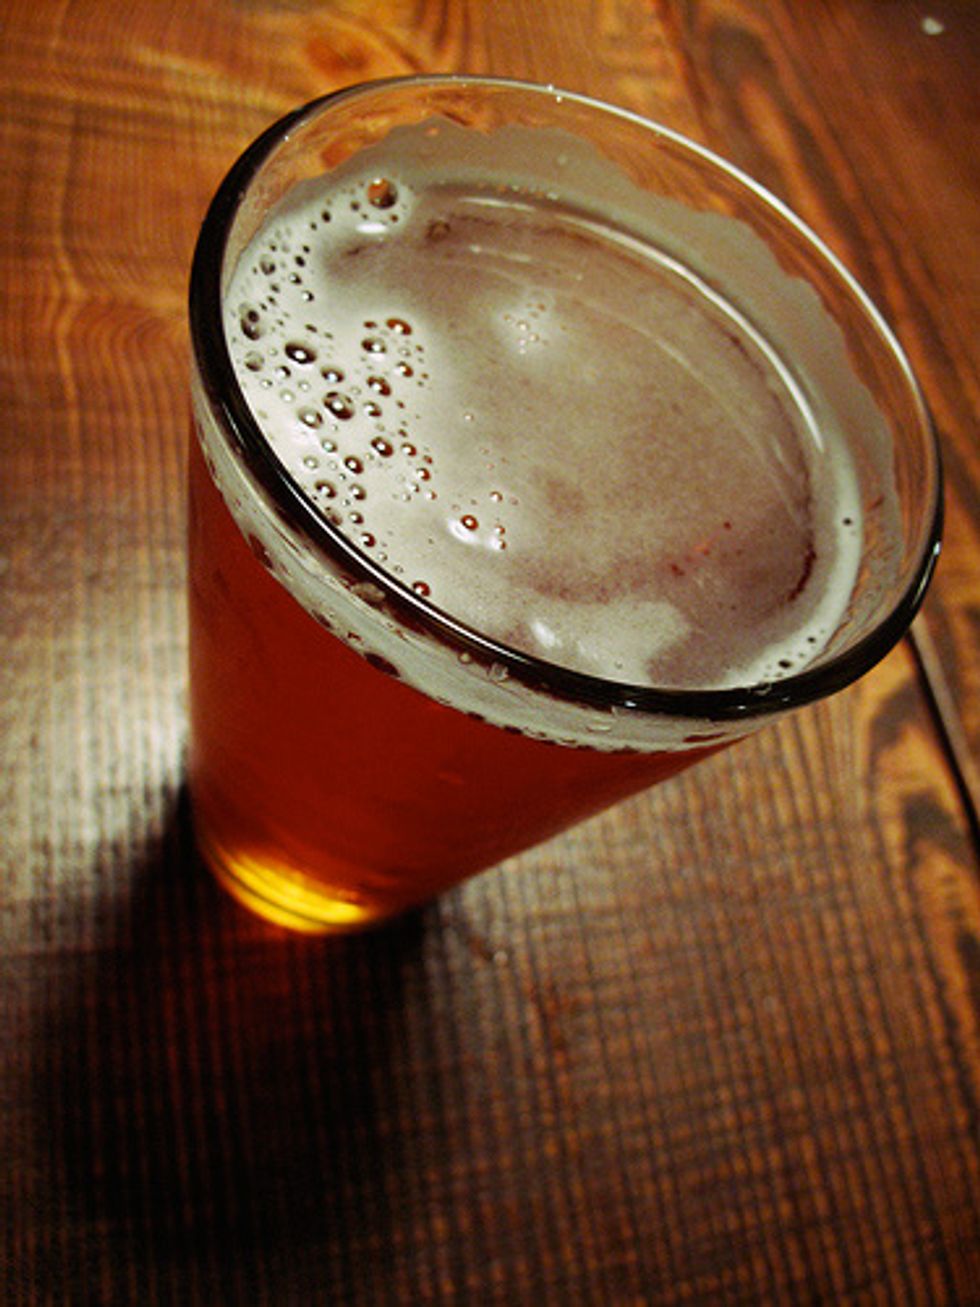 Head to the Mission's Rosamunde to Celebrate International IPA Day